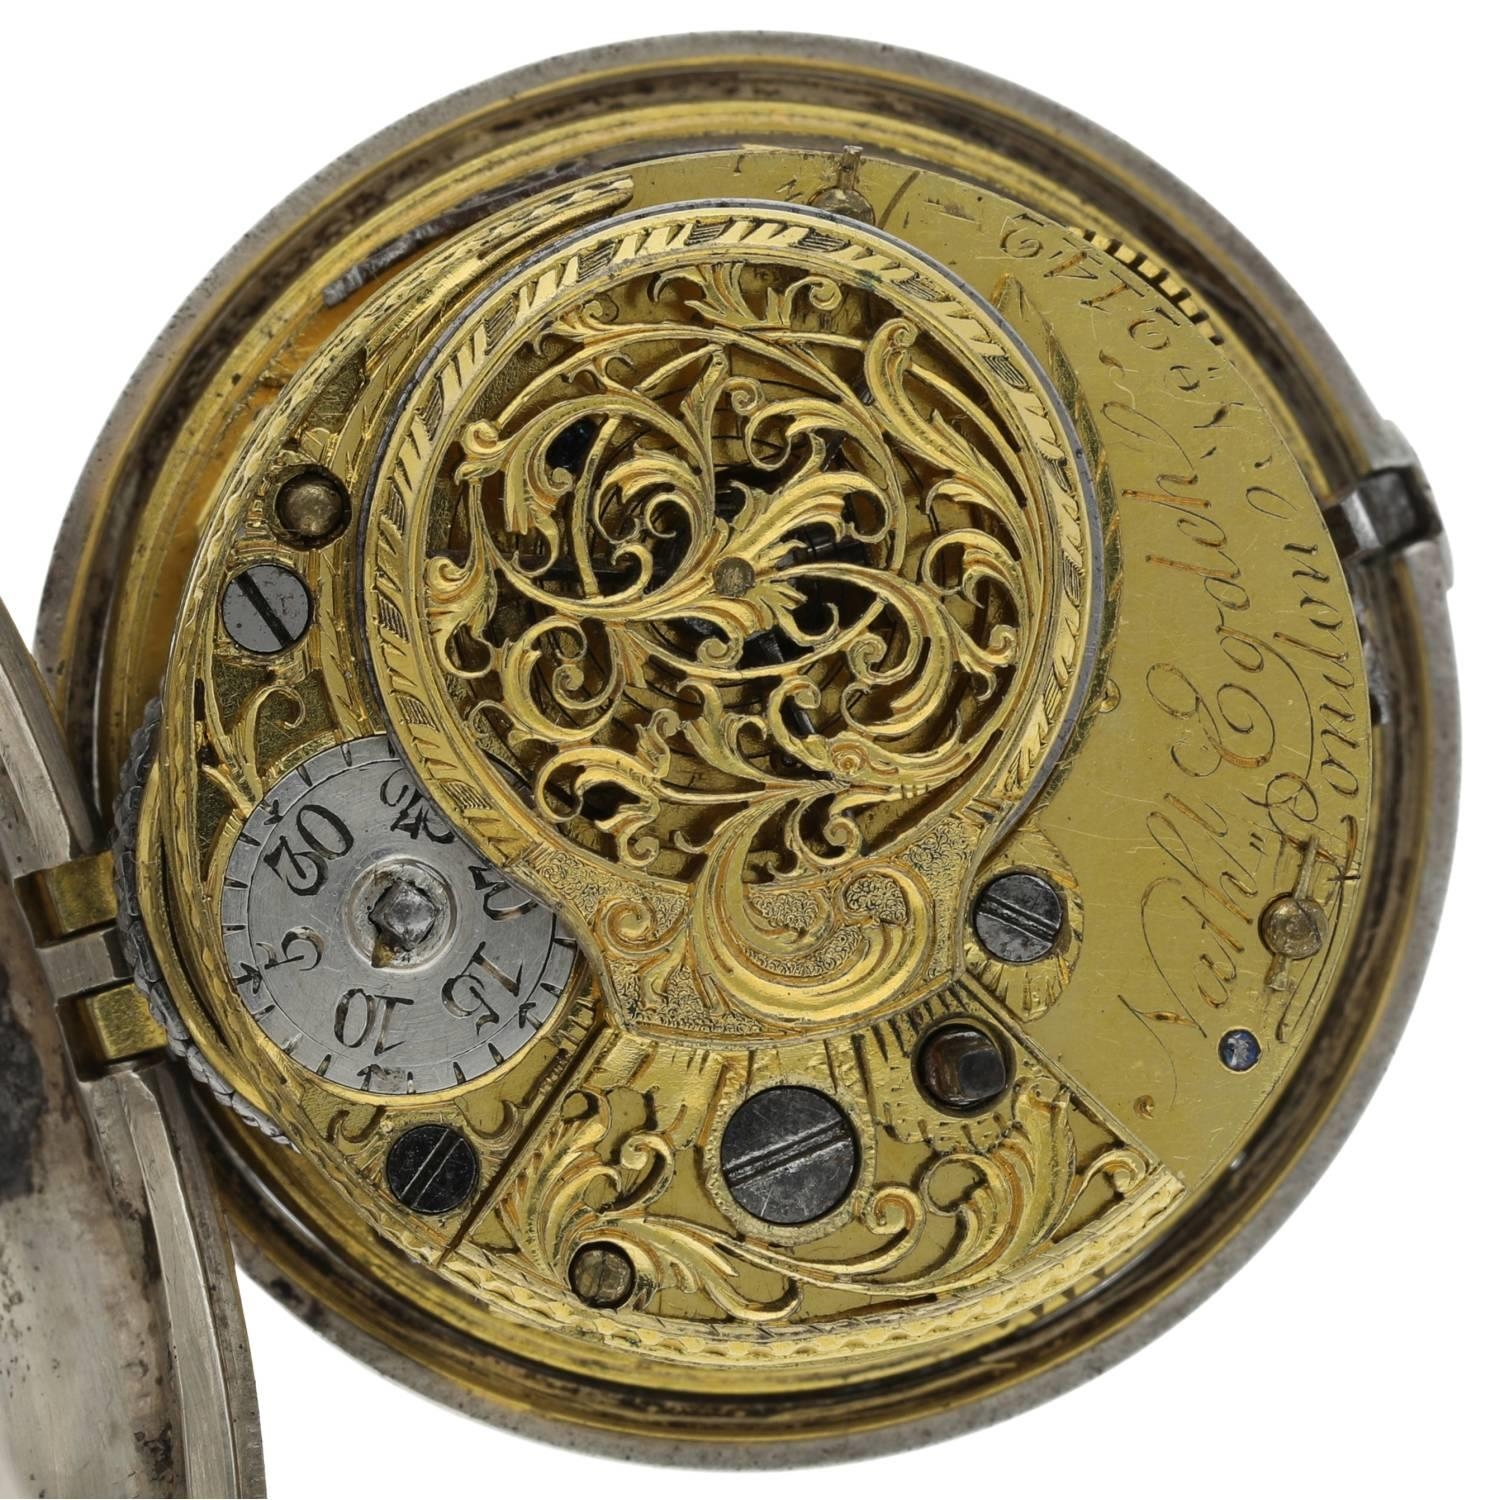 Nath'l Egdch, London - George III silver repoussé pair cased verge pocket watch for the Dutch - Image 4 of 10